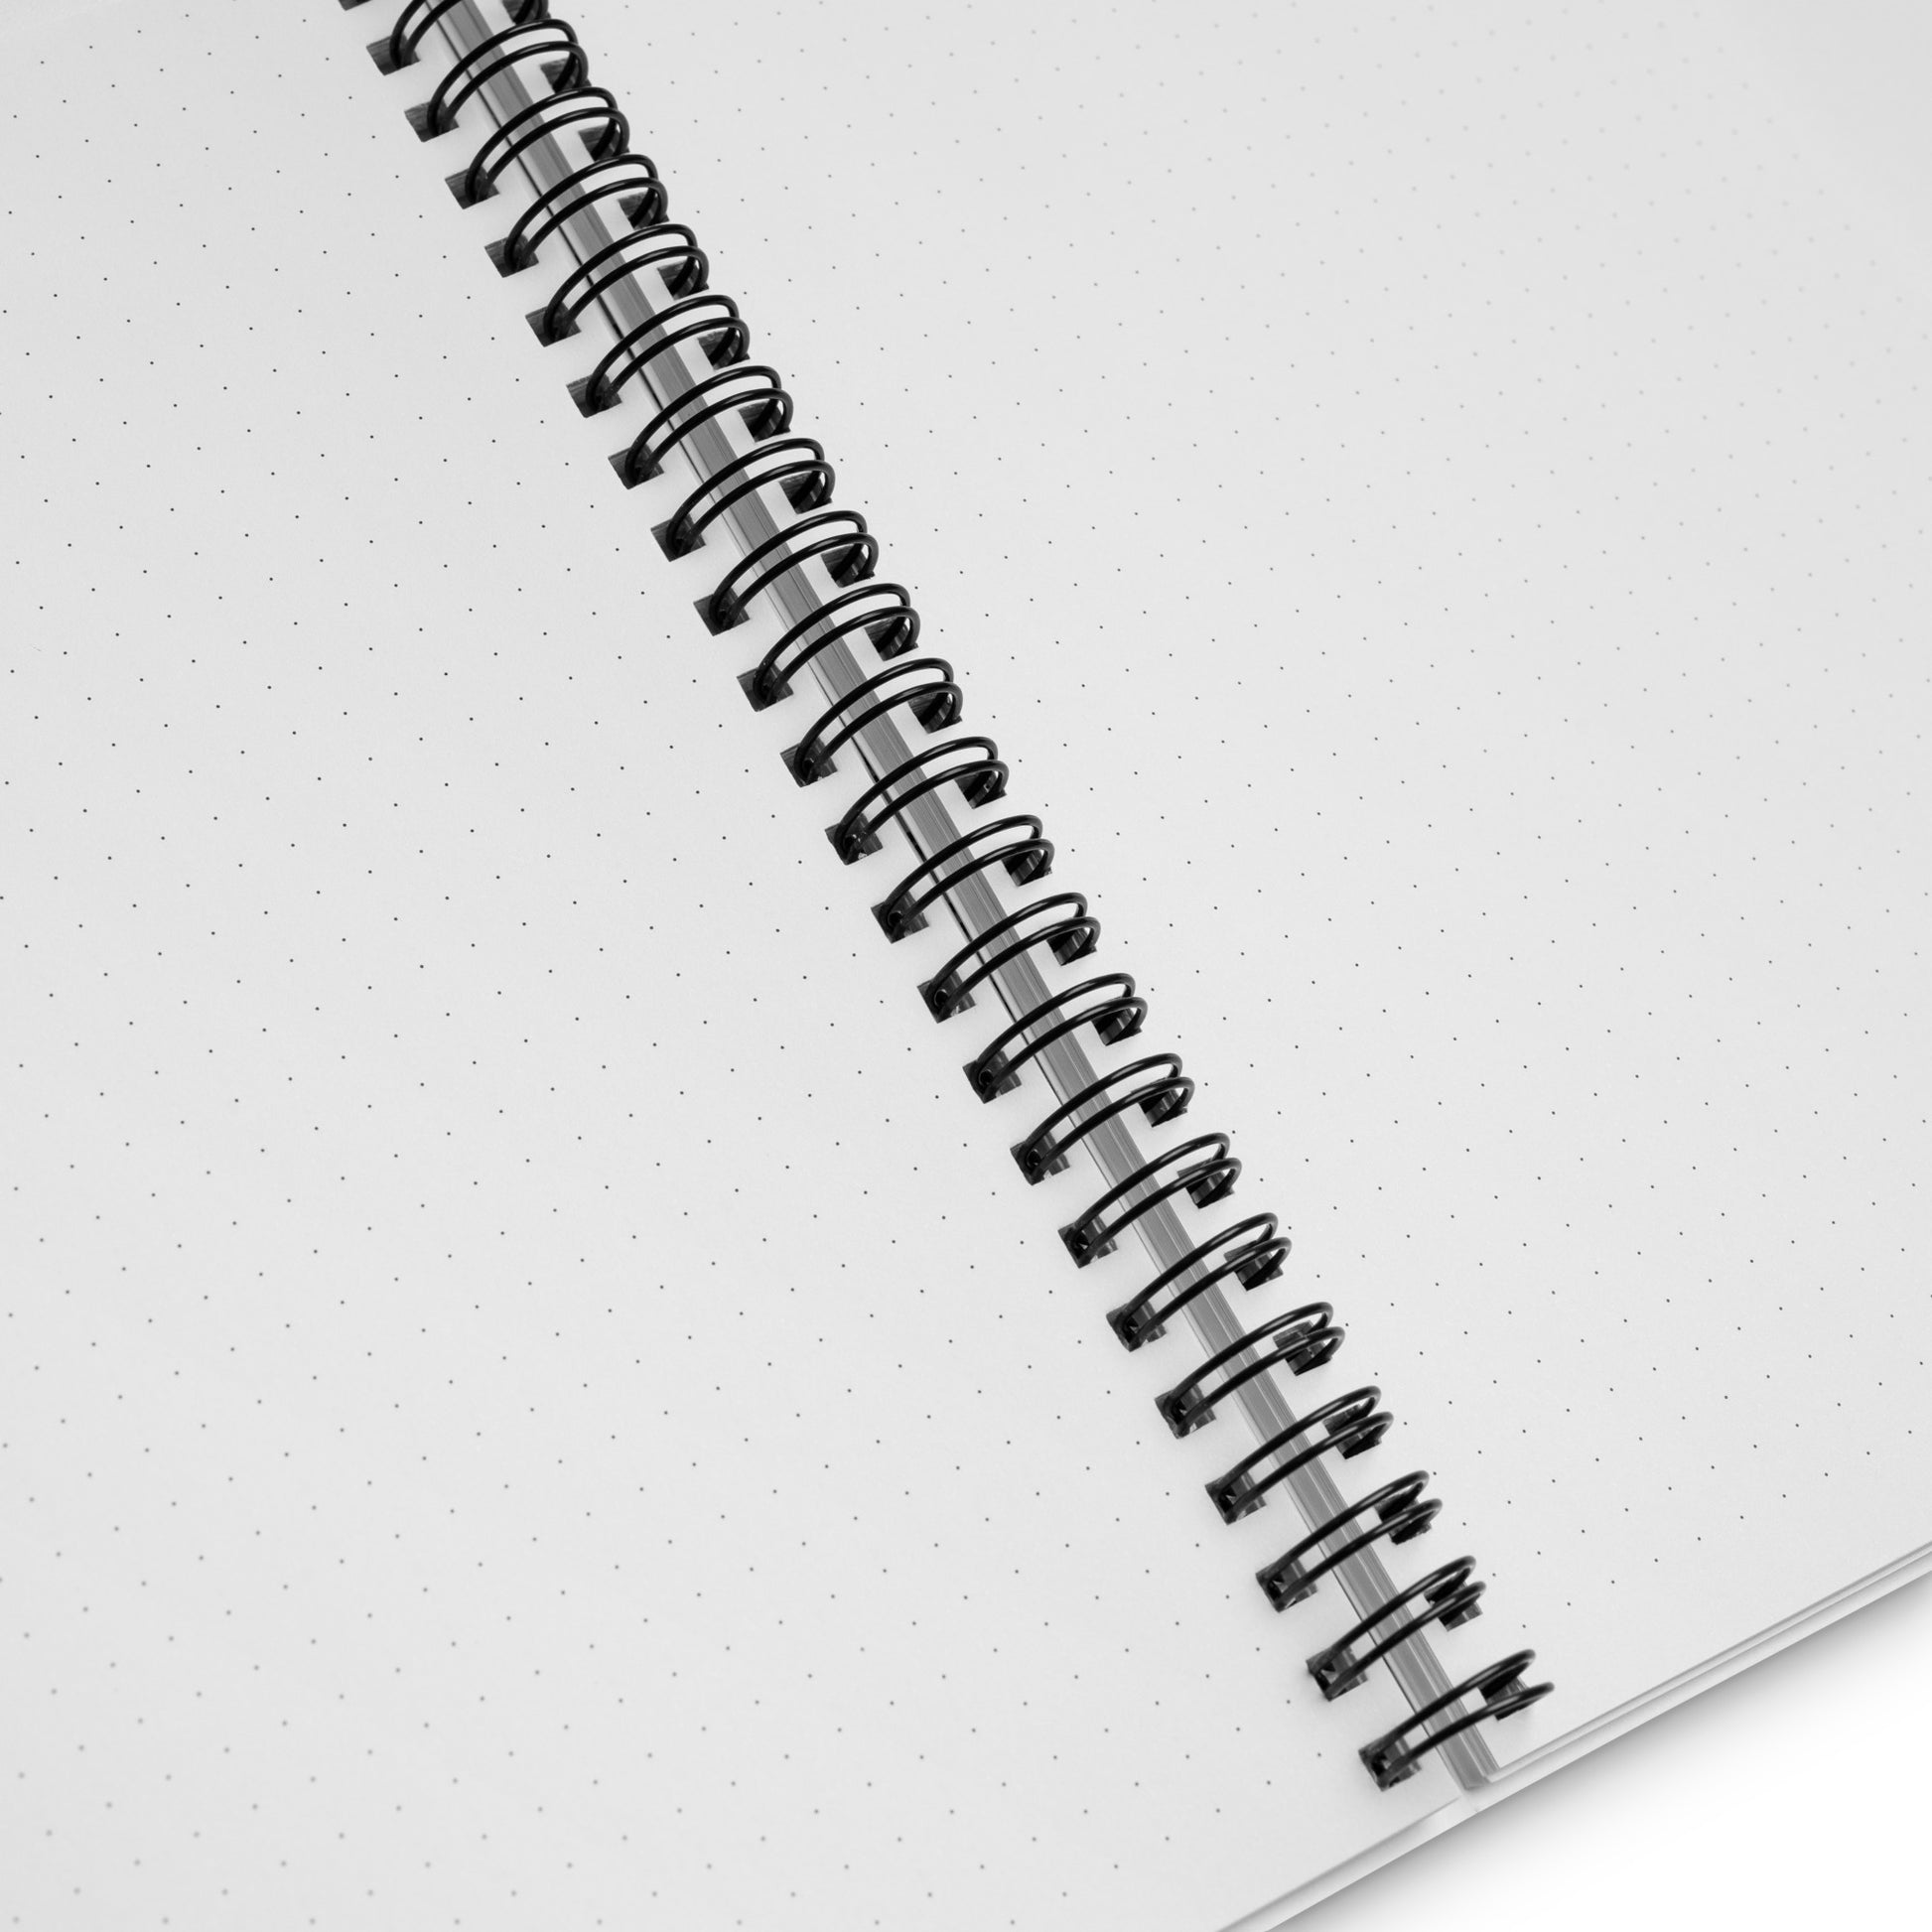 A close-up image of an open notebook. The image focuses on the dot-grid paper inside the notebook.